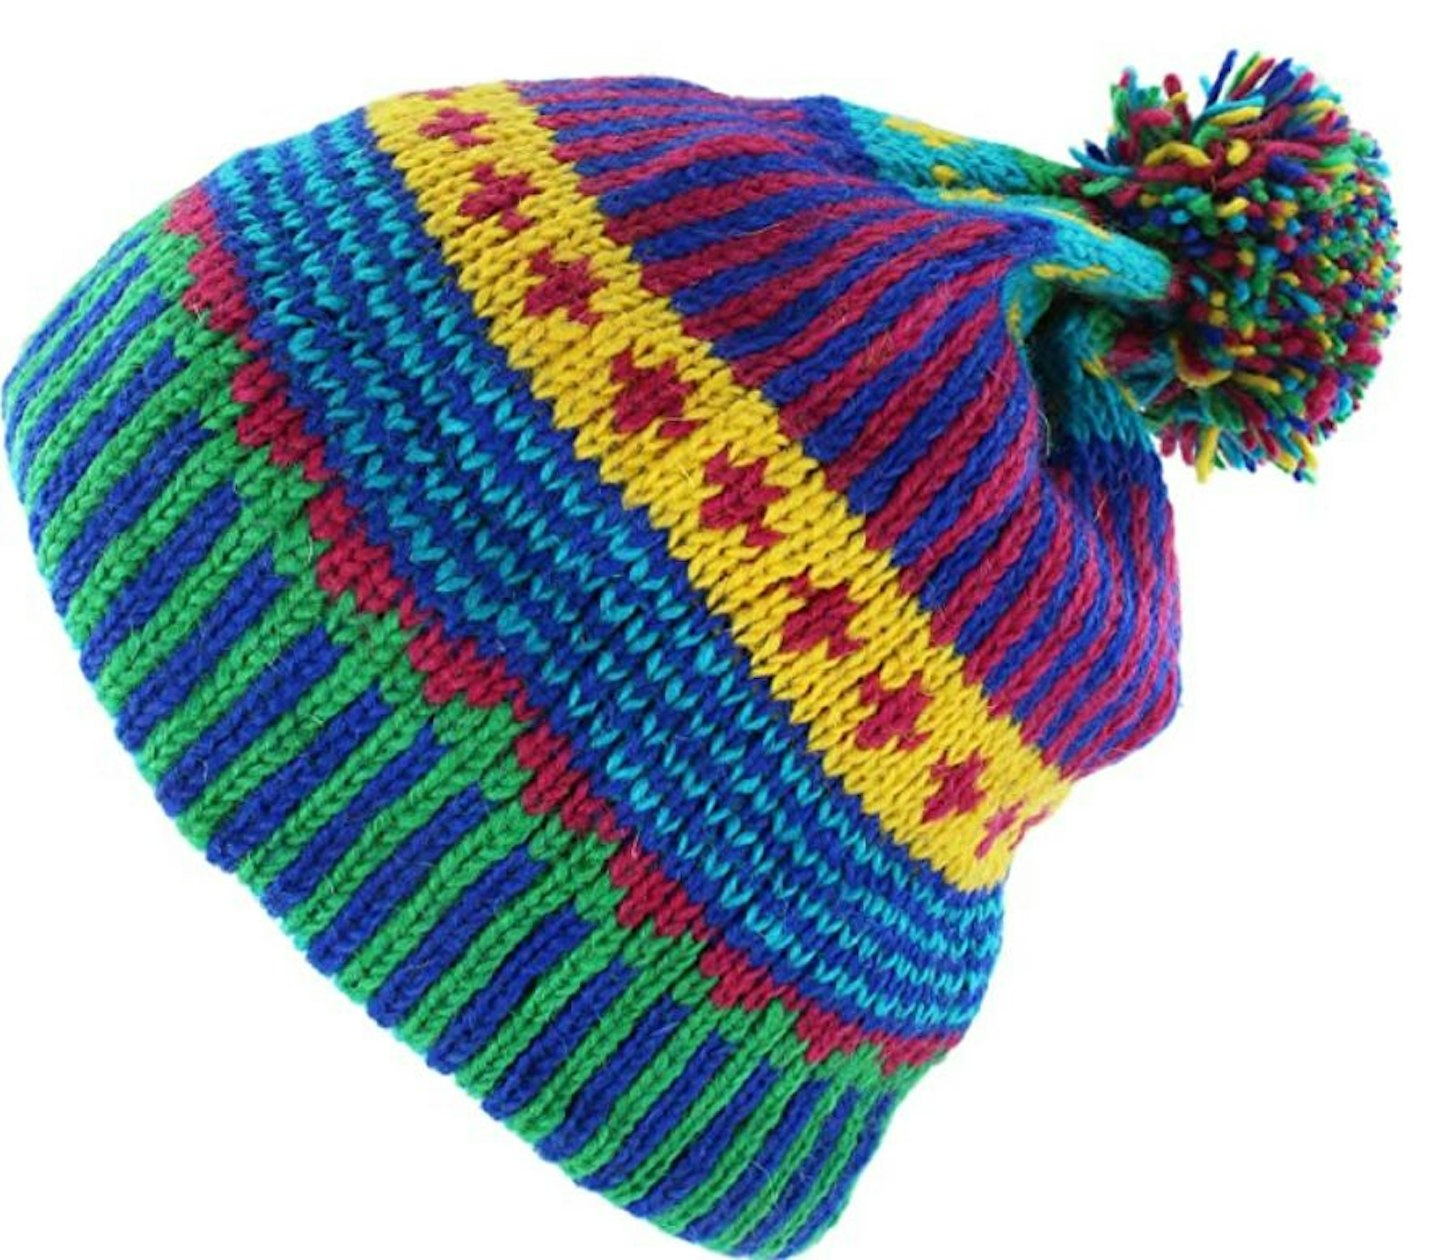 Ministry of Colour Wool Knit Slouch Beanie Bobble Hat